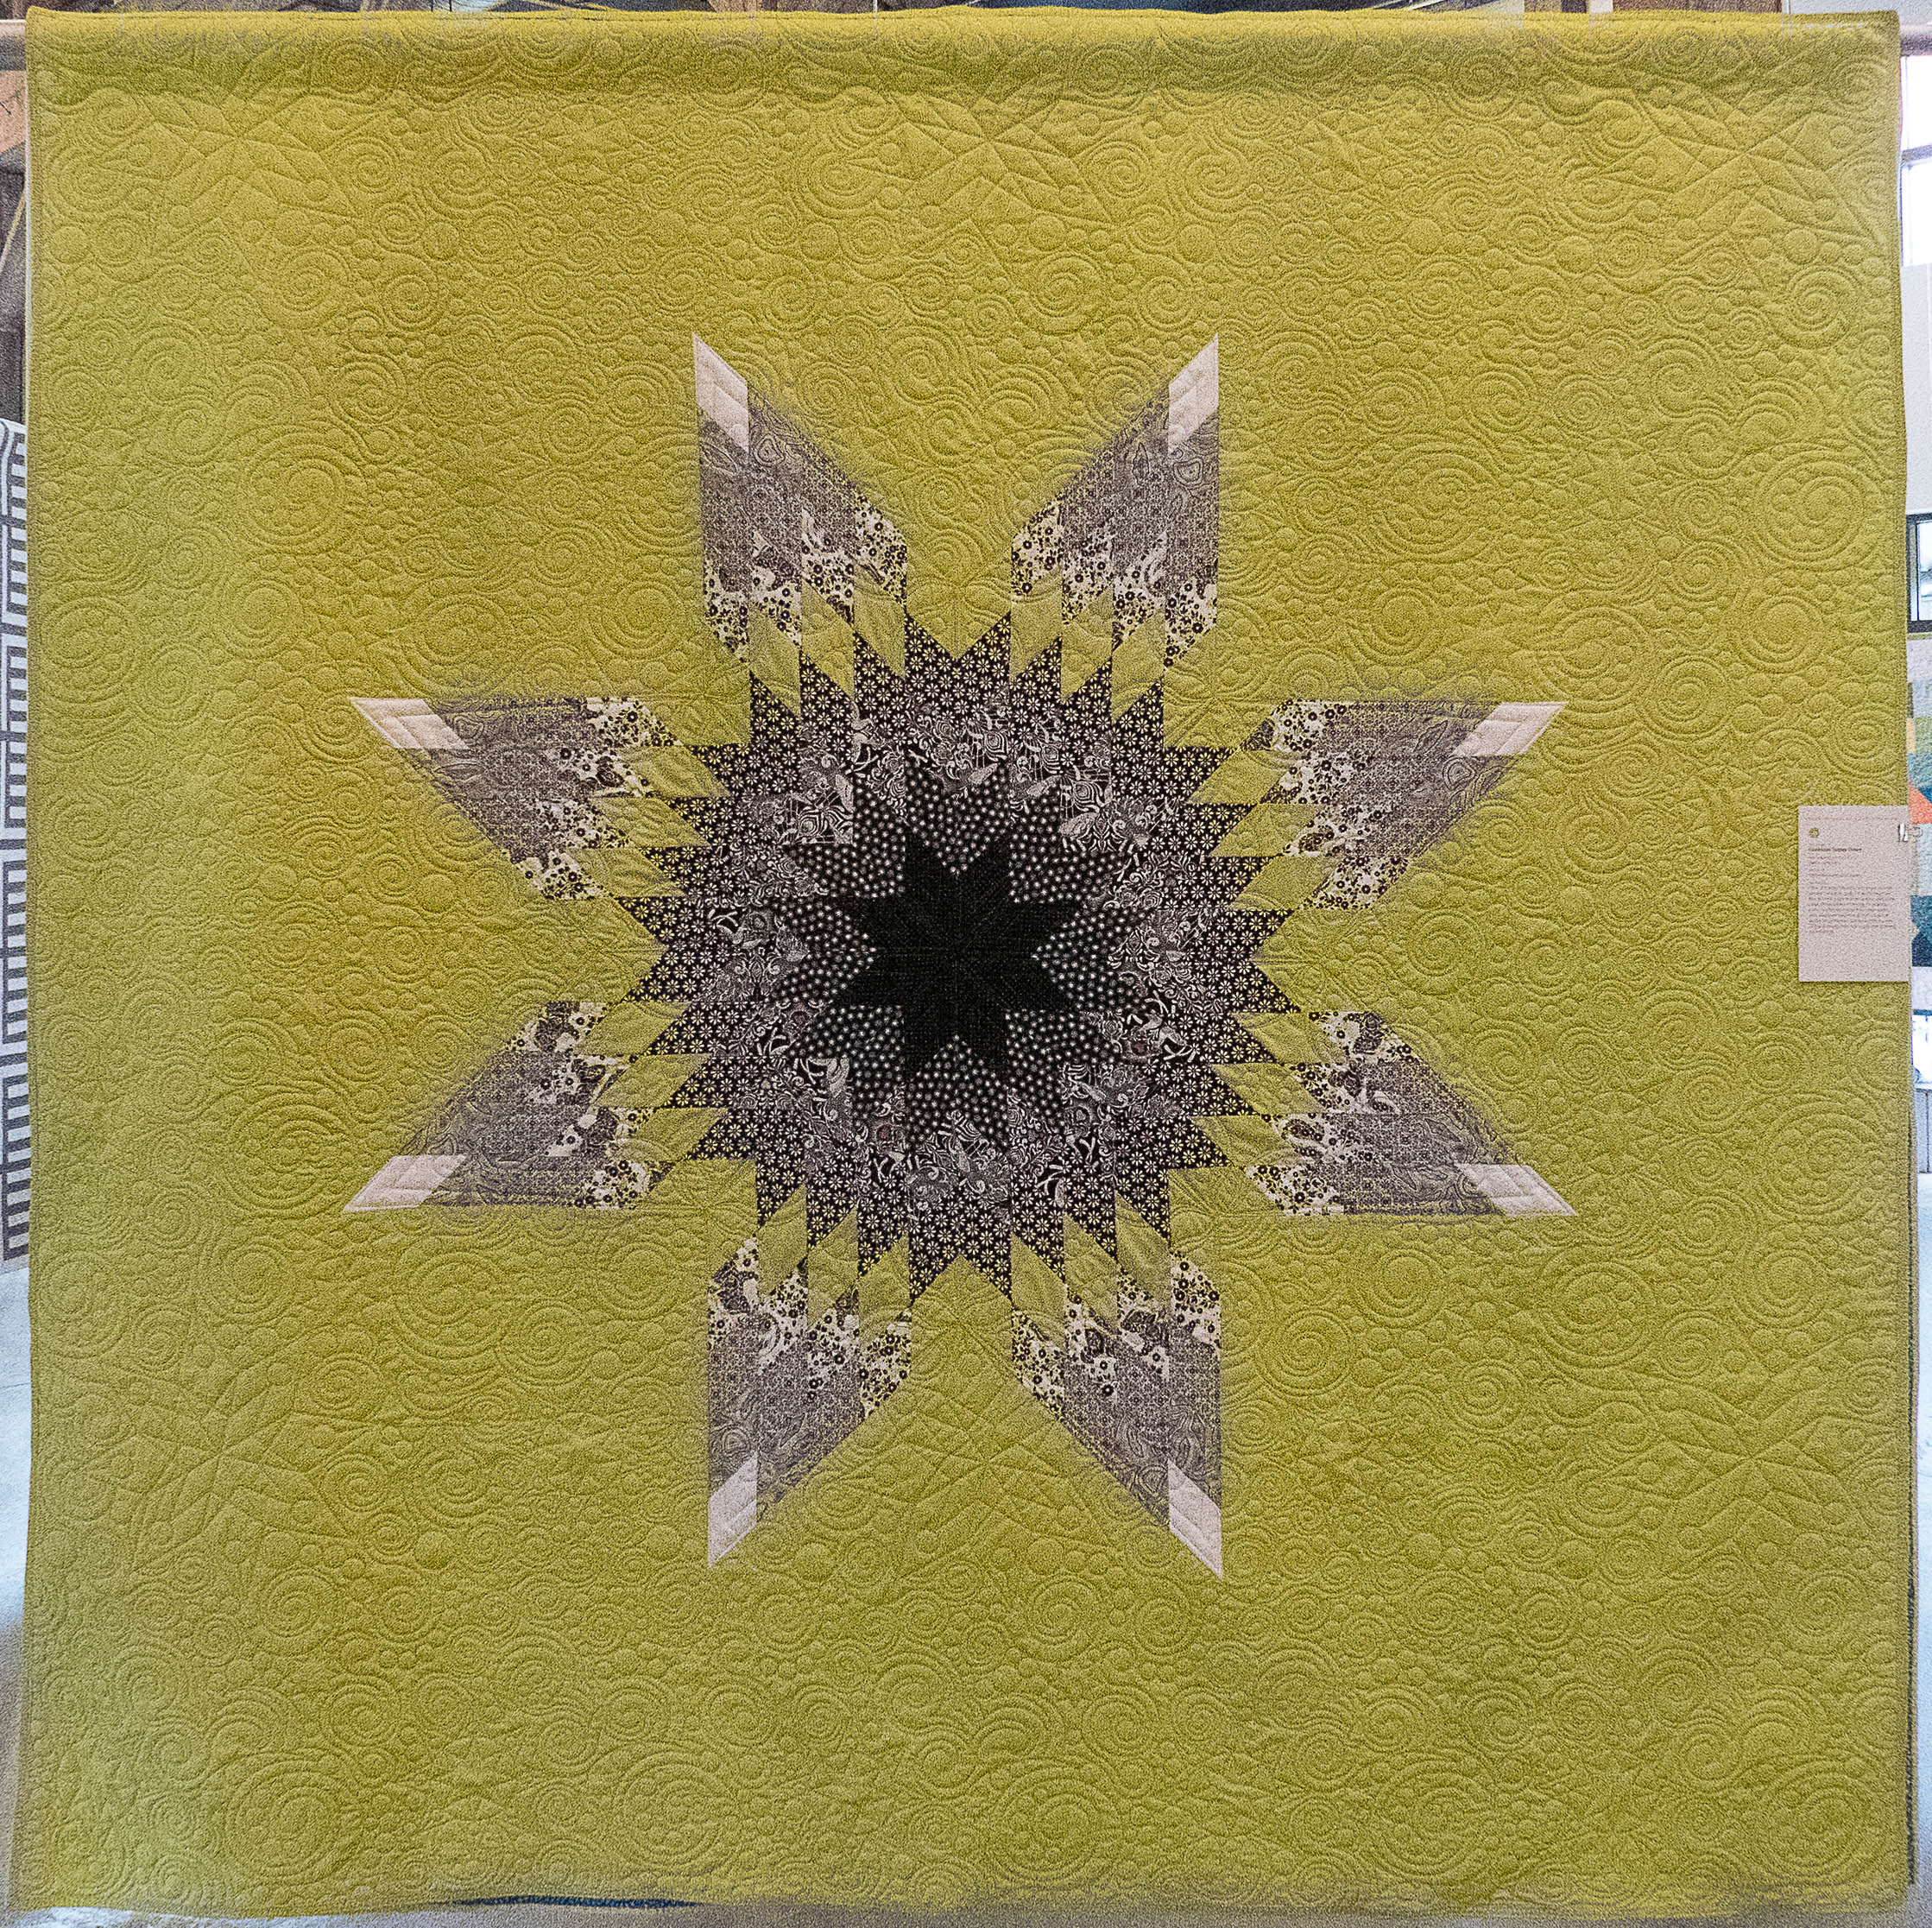 modern quilt containing a star in the middle